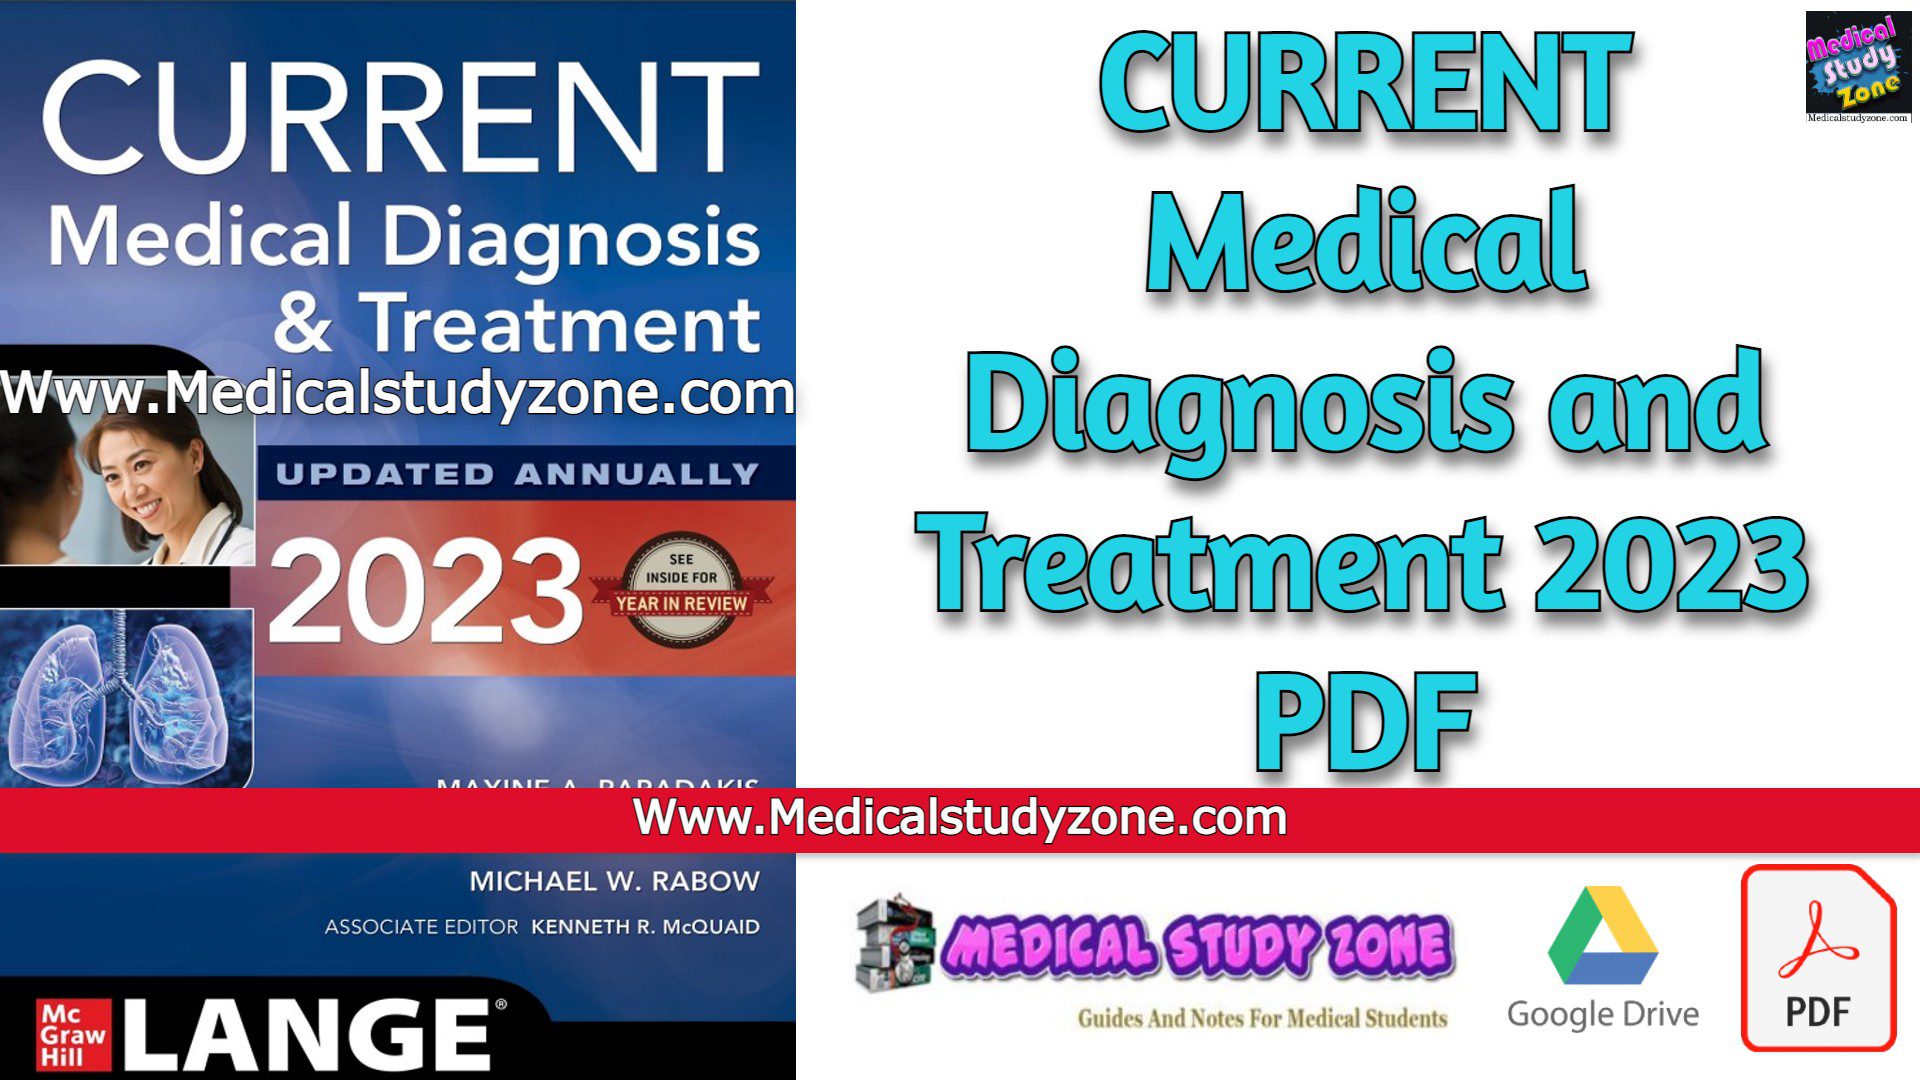 CURRENT Medical Diagnosis and Treatment 2023 PDF Free Download